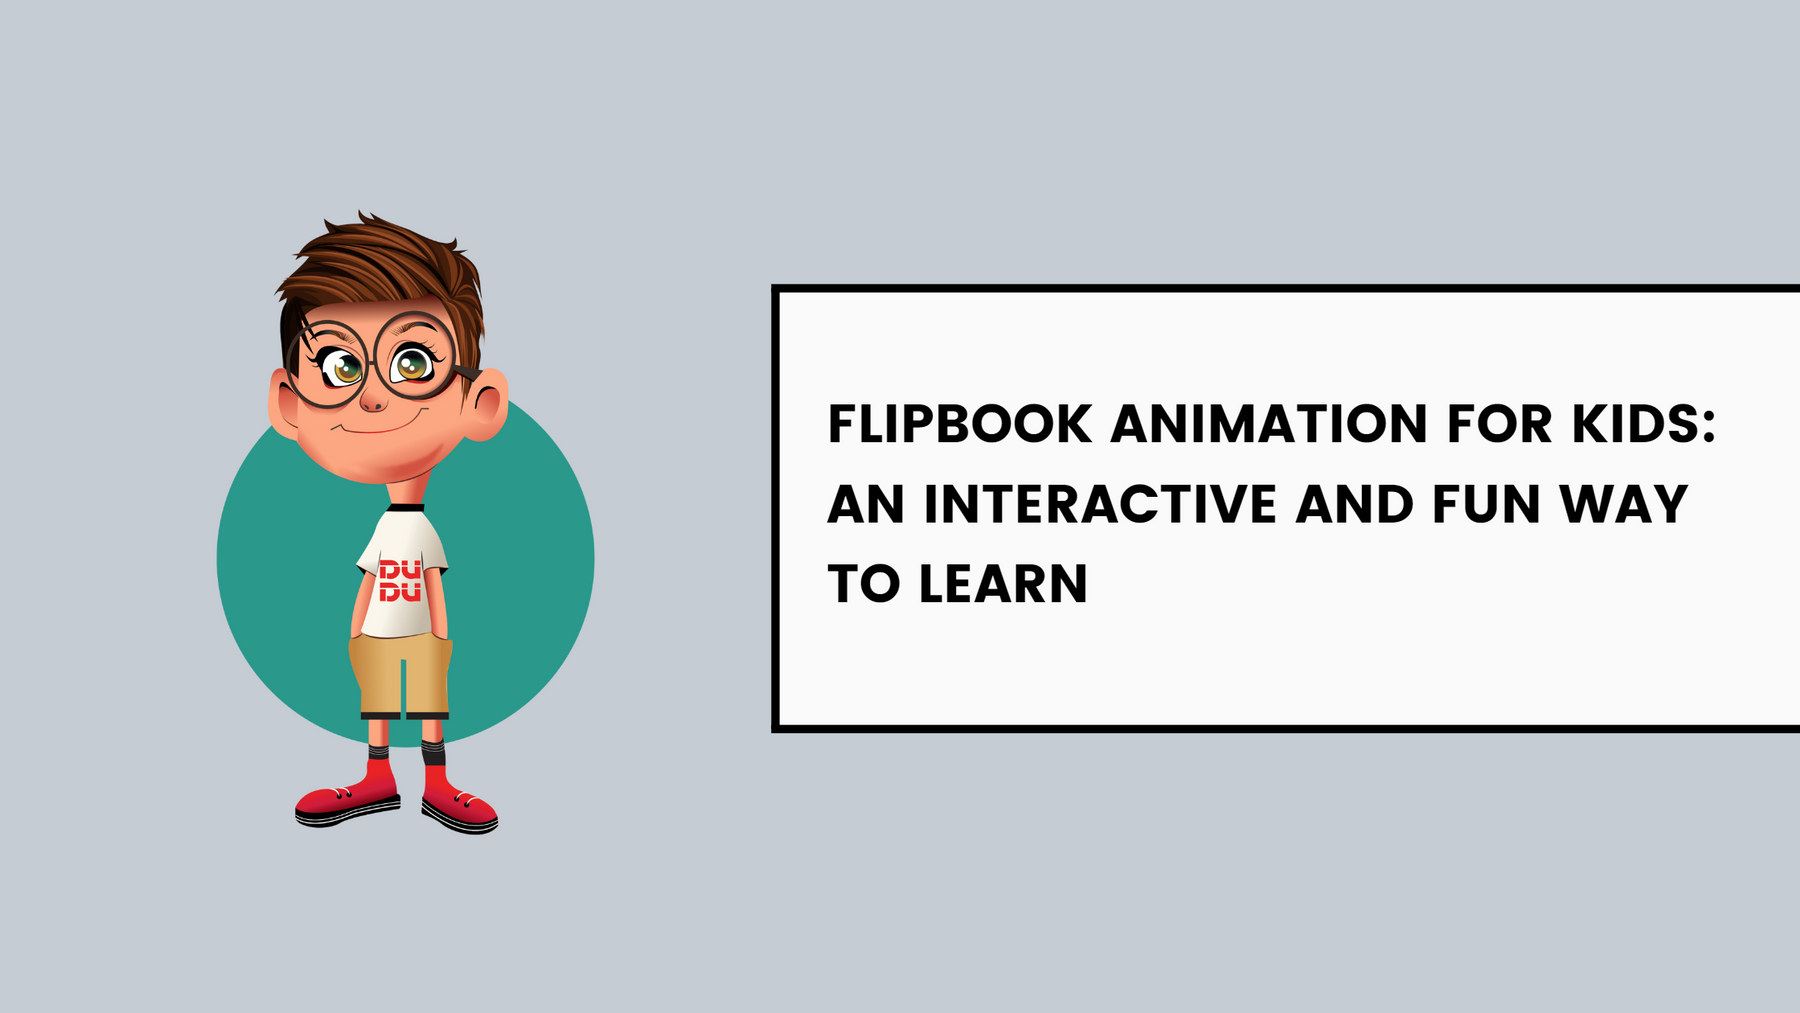 Flipbook Animation For Kids: An Interactive And Fun Way To Learn